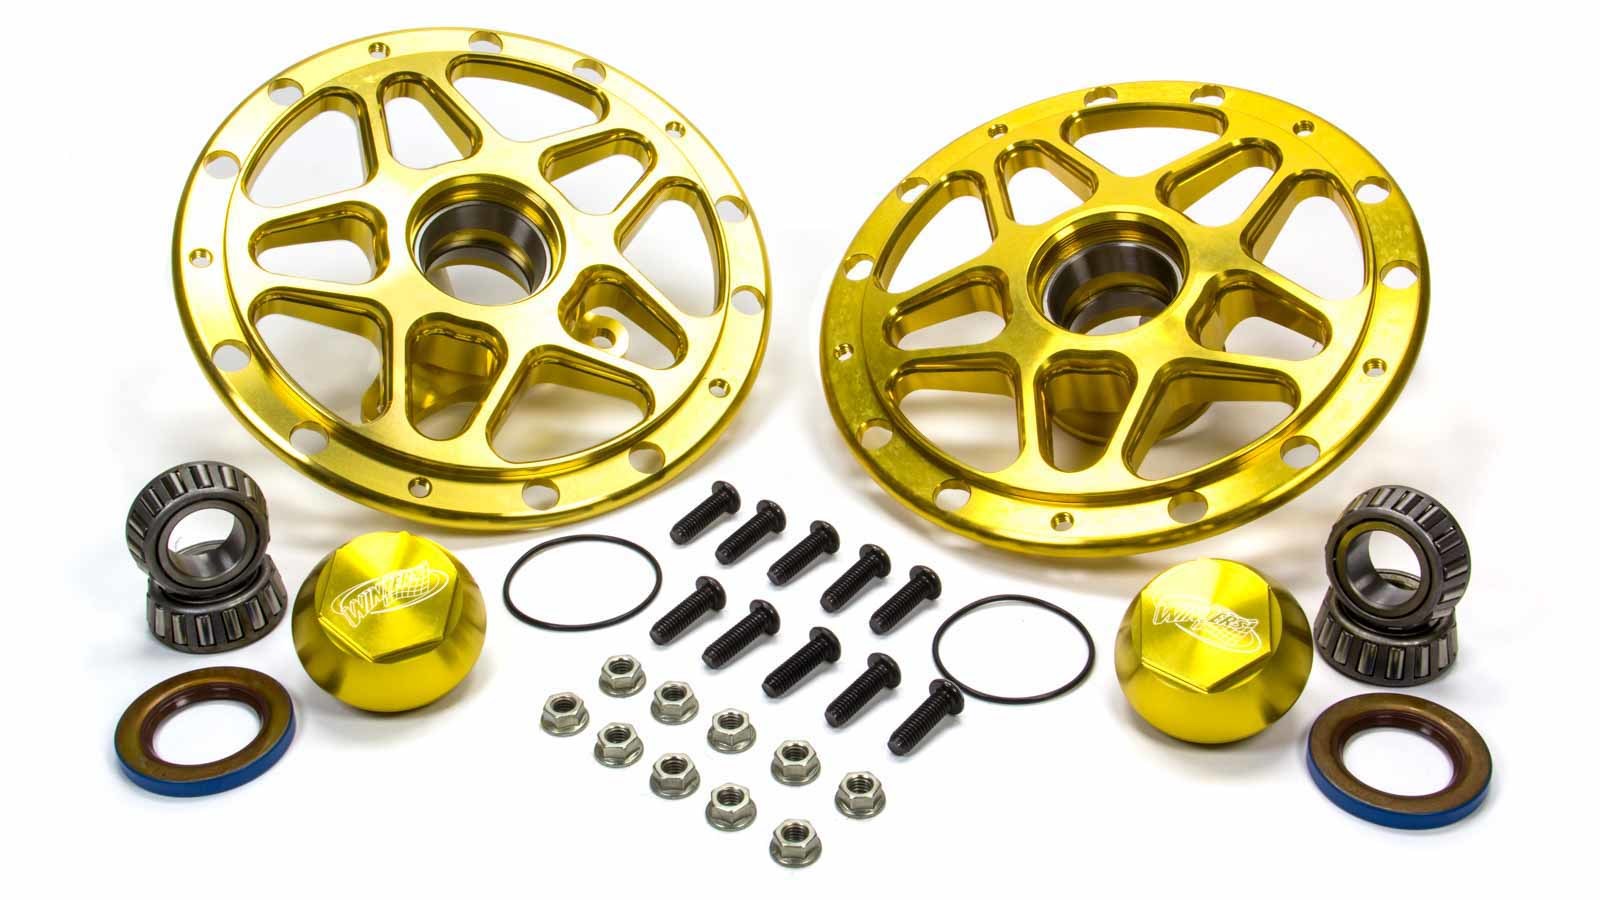 Shop for Wheel Hubs, Bearings and Components ::